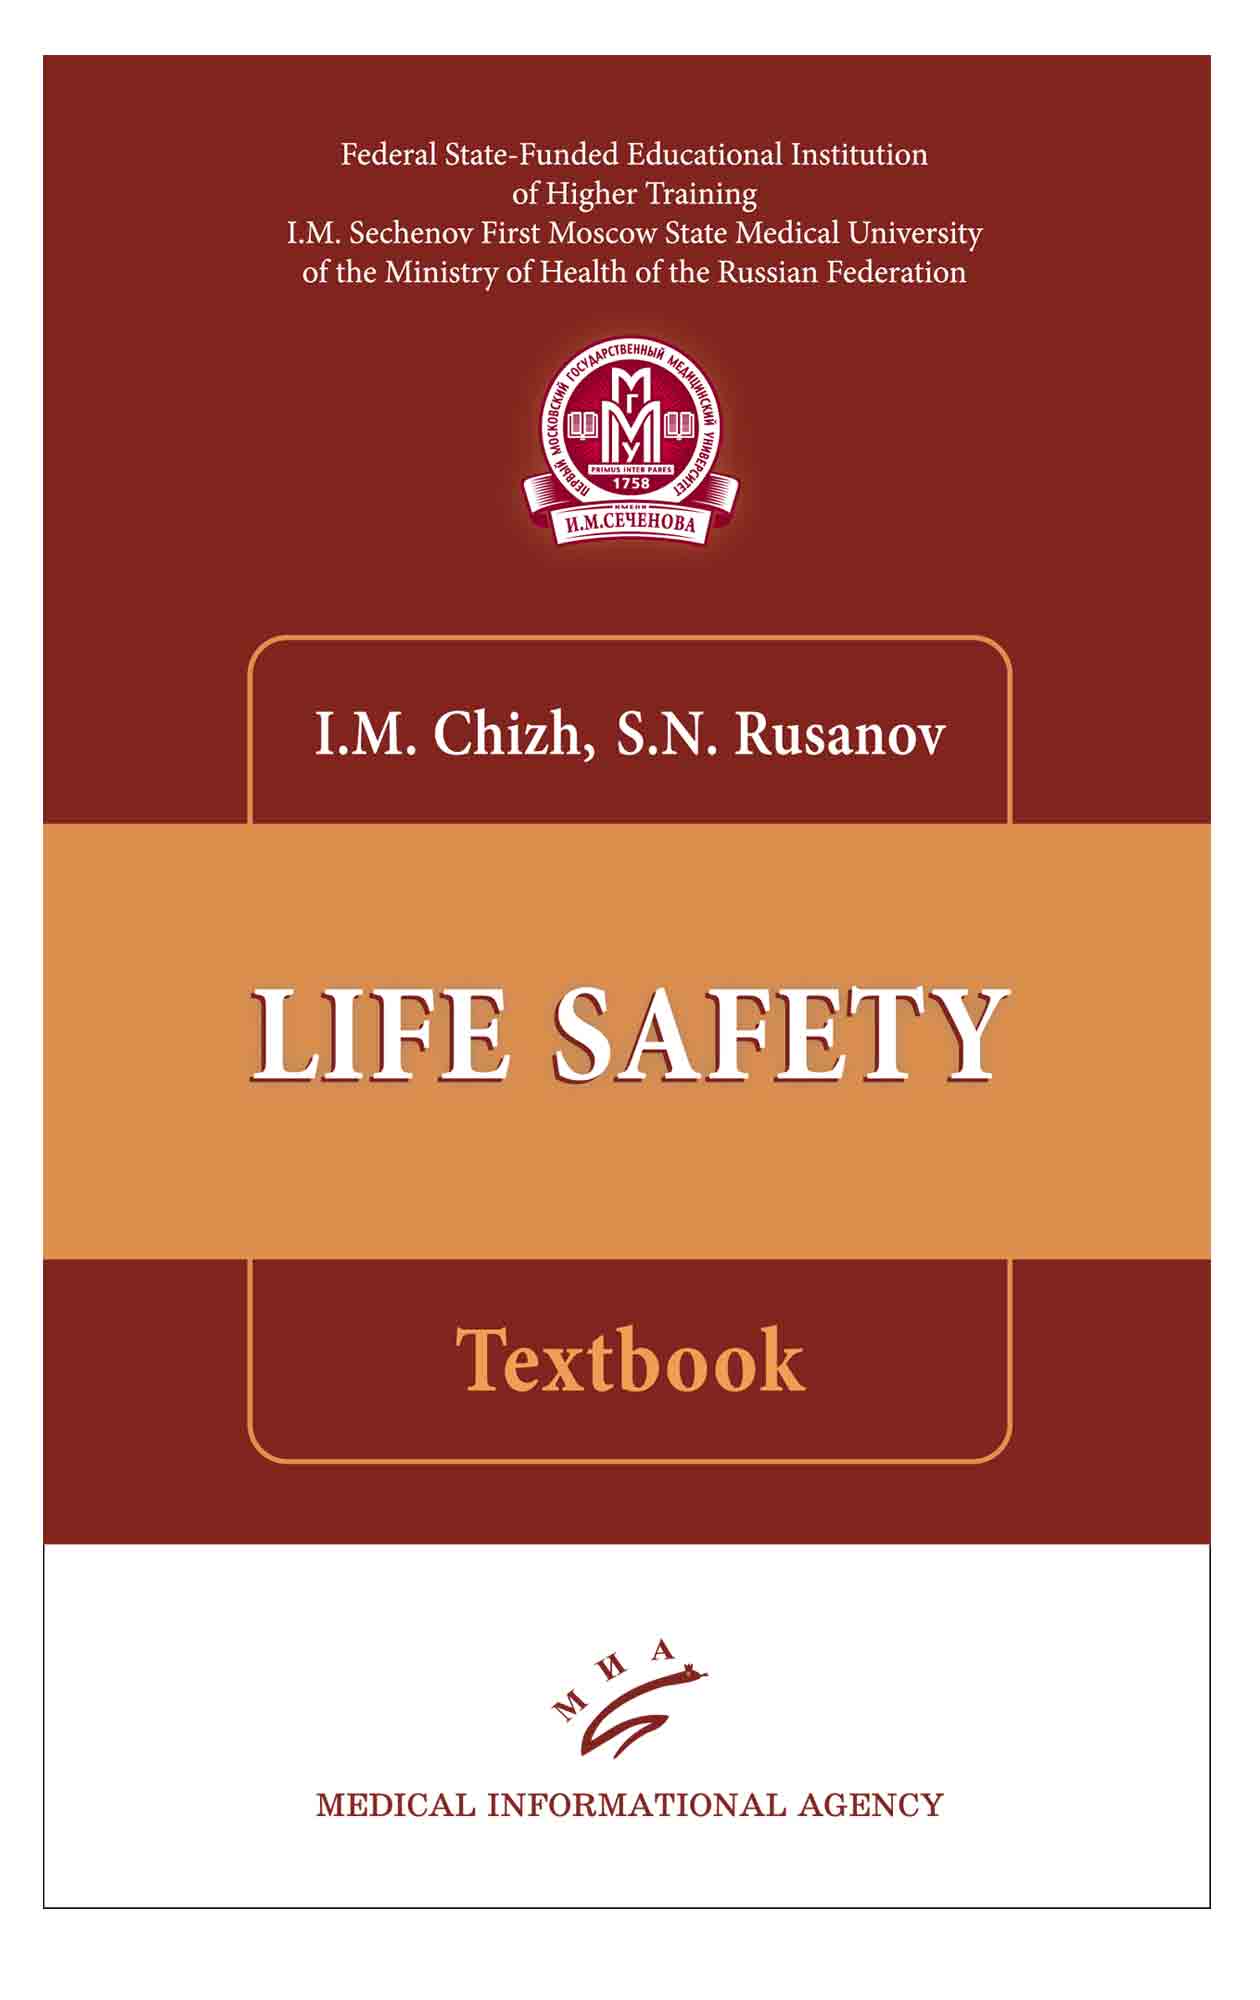 Life safety is